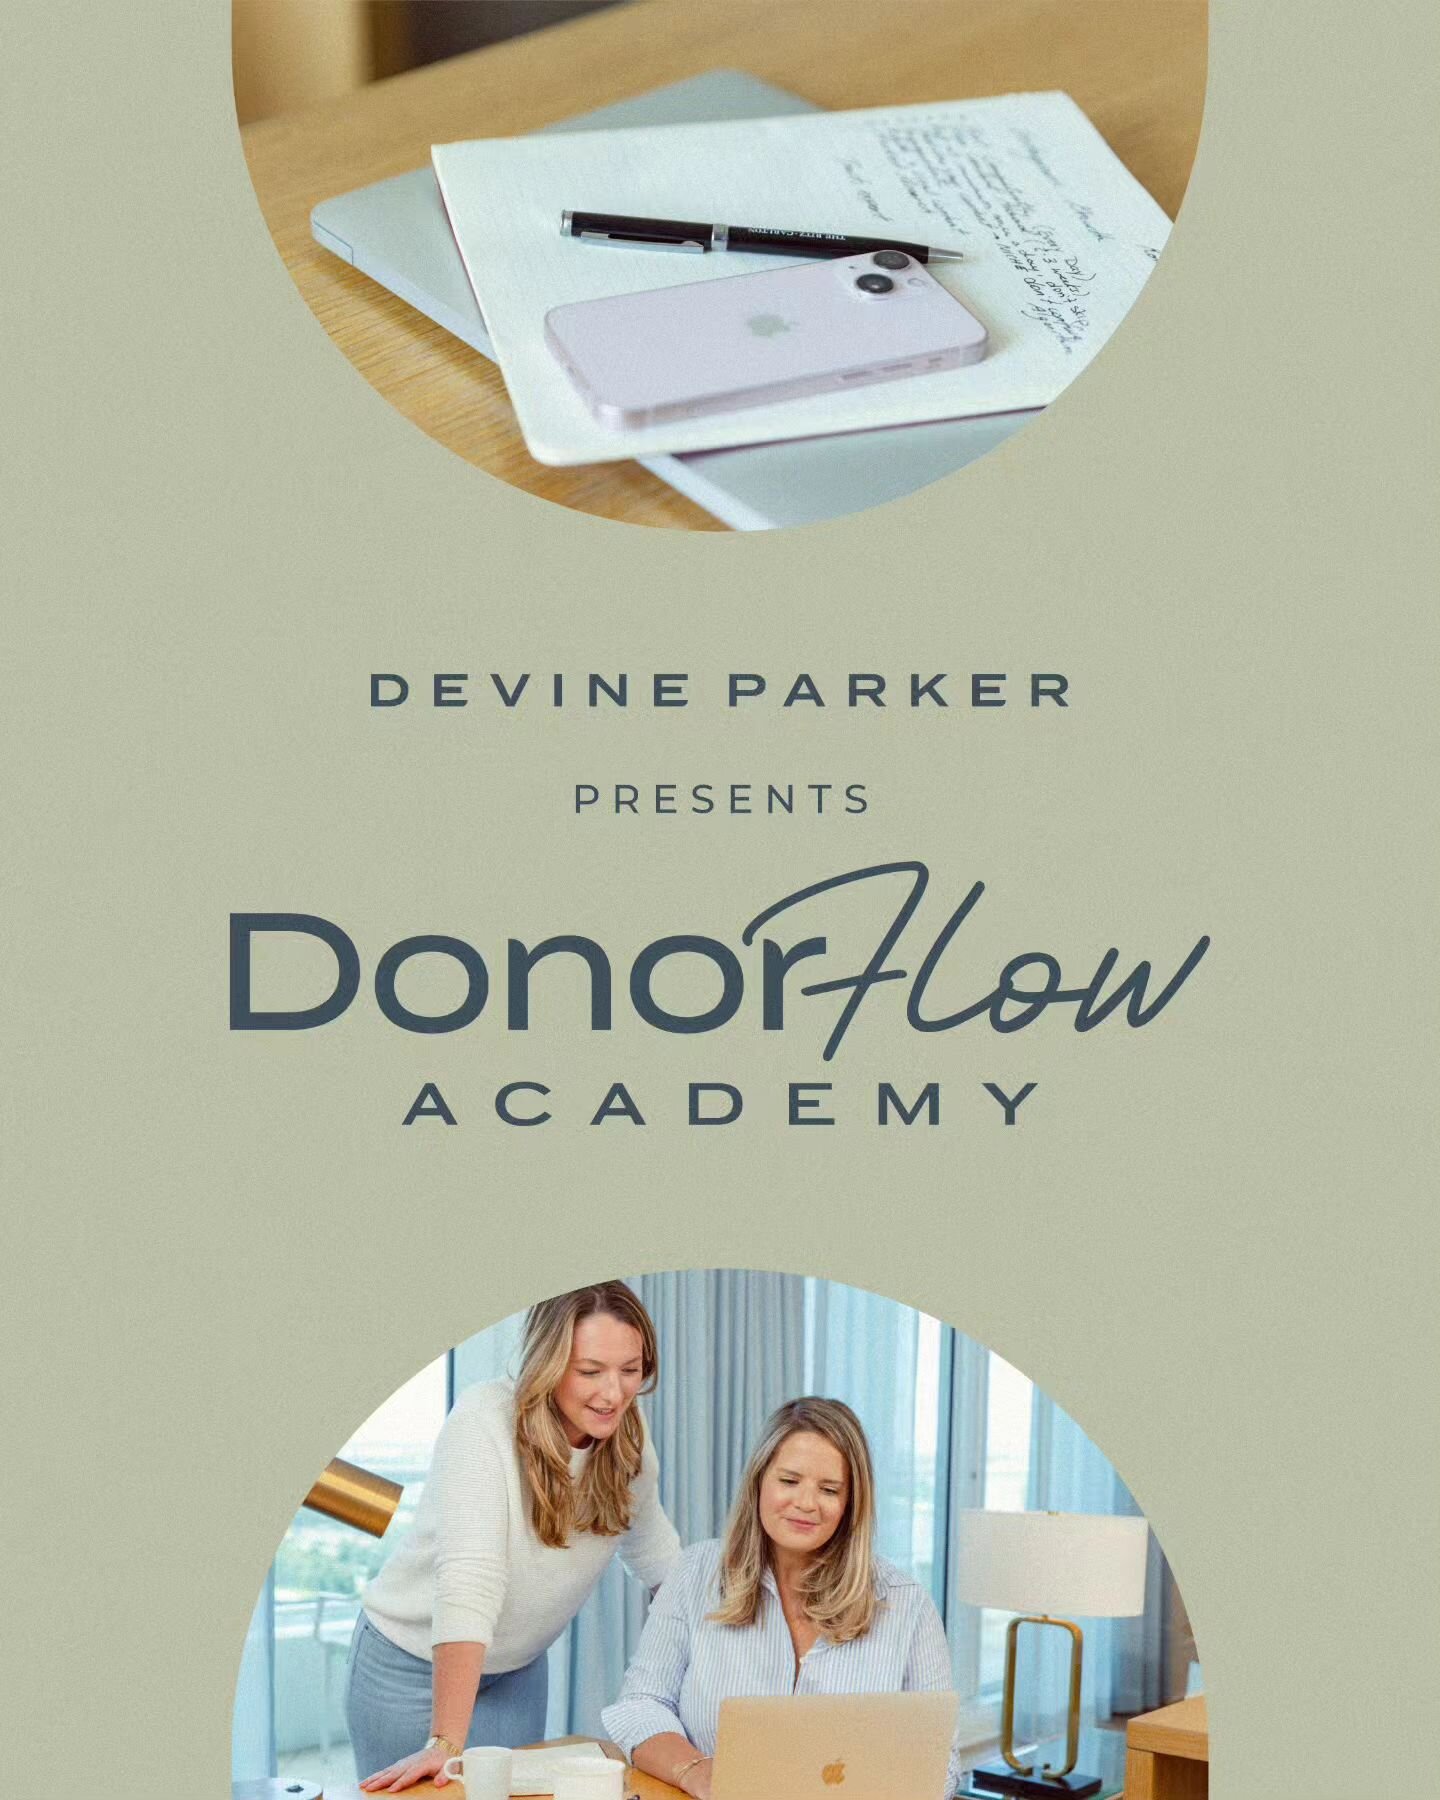 BRAND REVEAL Part 03|
This week, we're celebrating innovation and transformation with the reveal of the new branding for Devine Parker Consulting!🥂

Overcoming the challenges of an illegible logo and a restricted brand personality, we've crafted a b